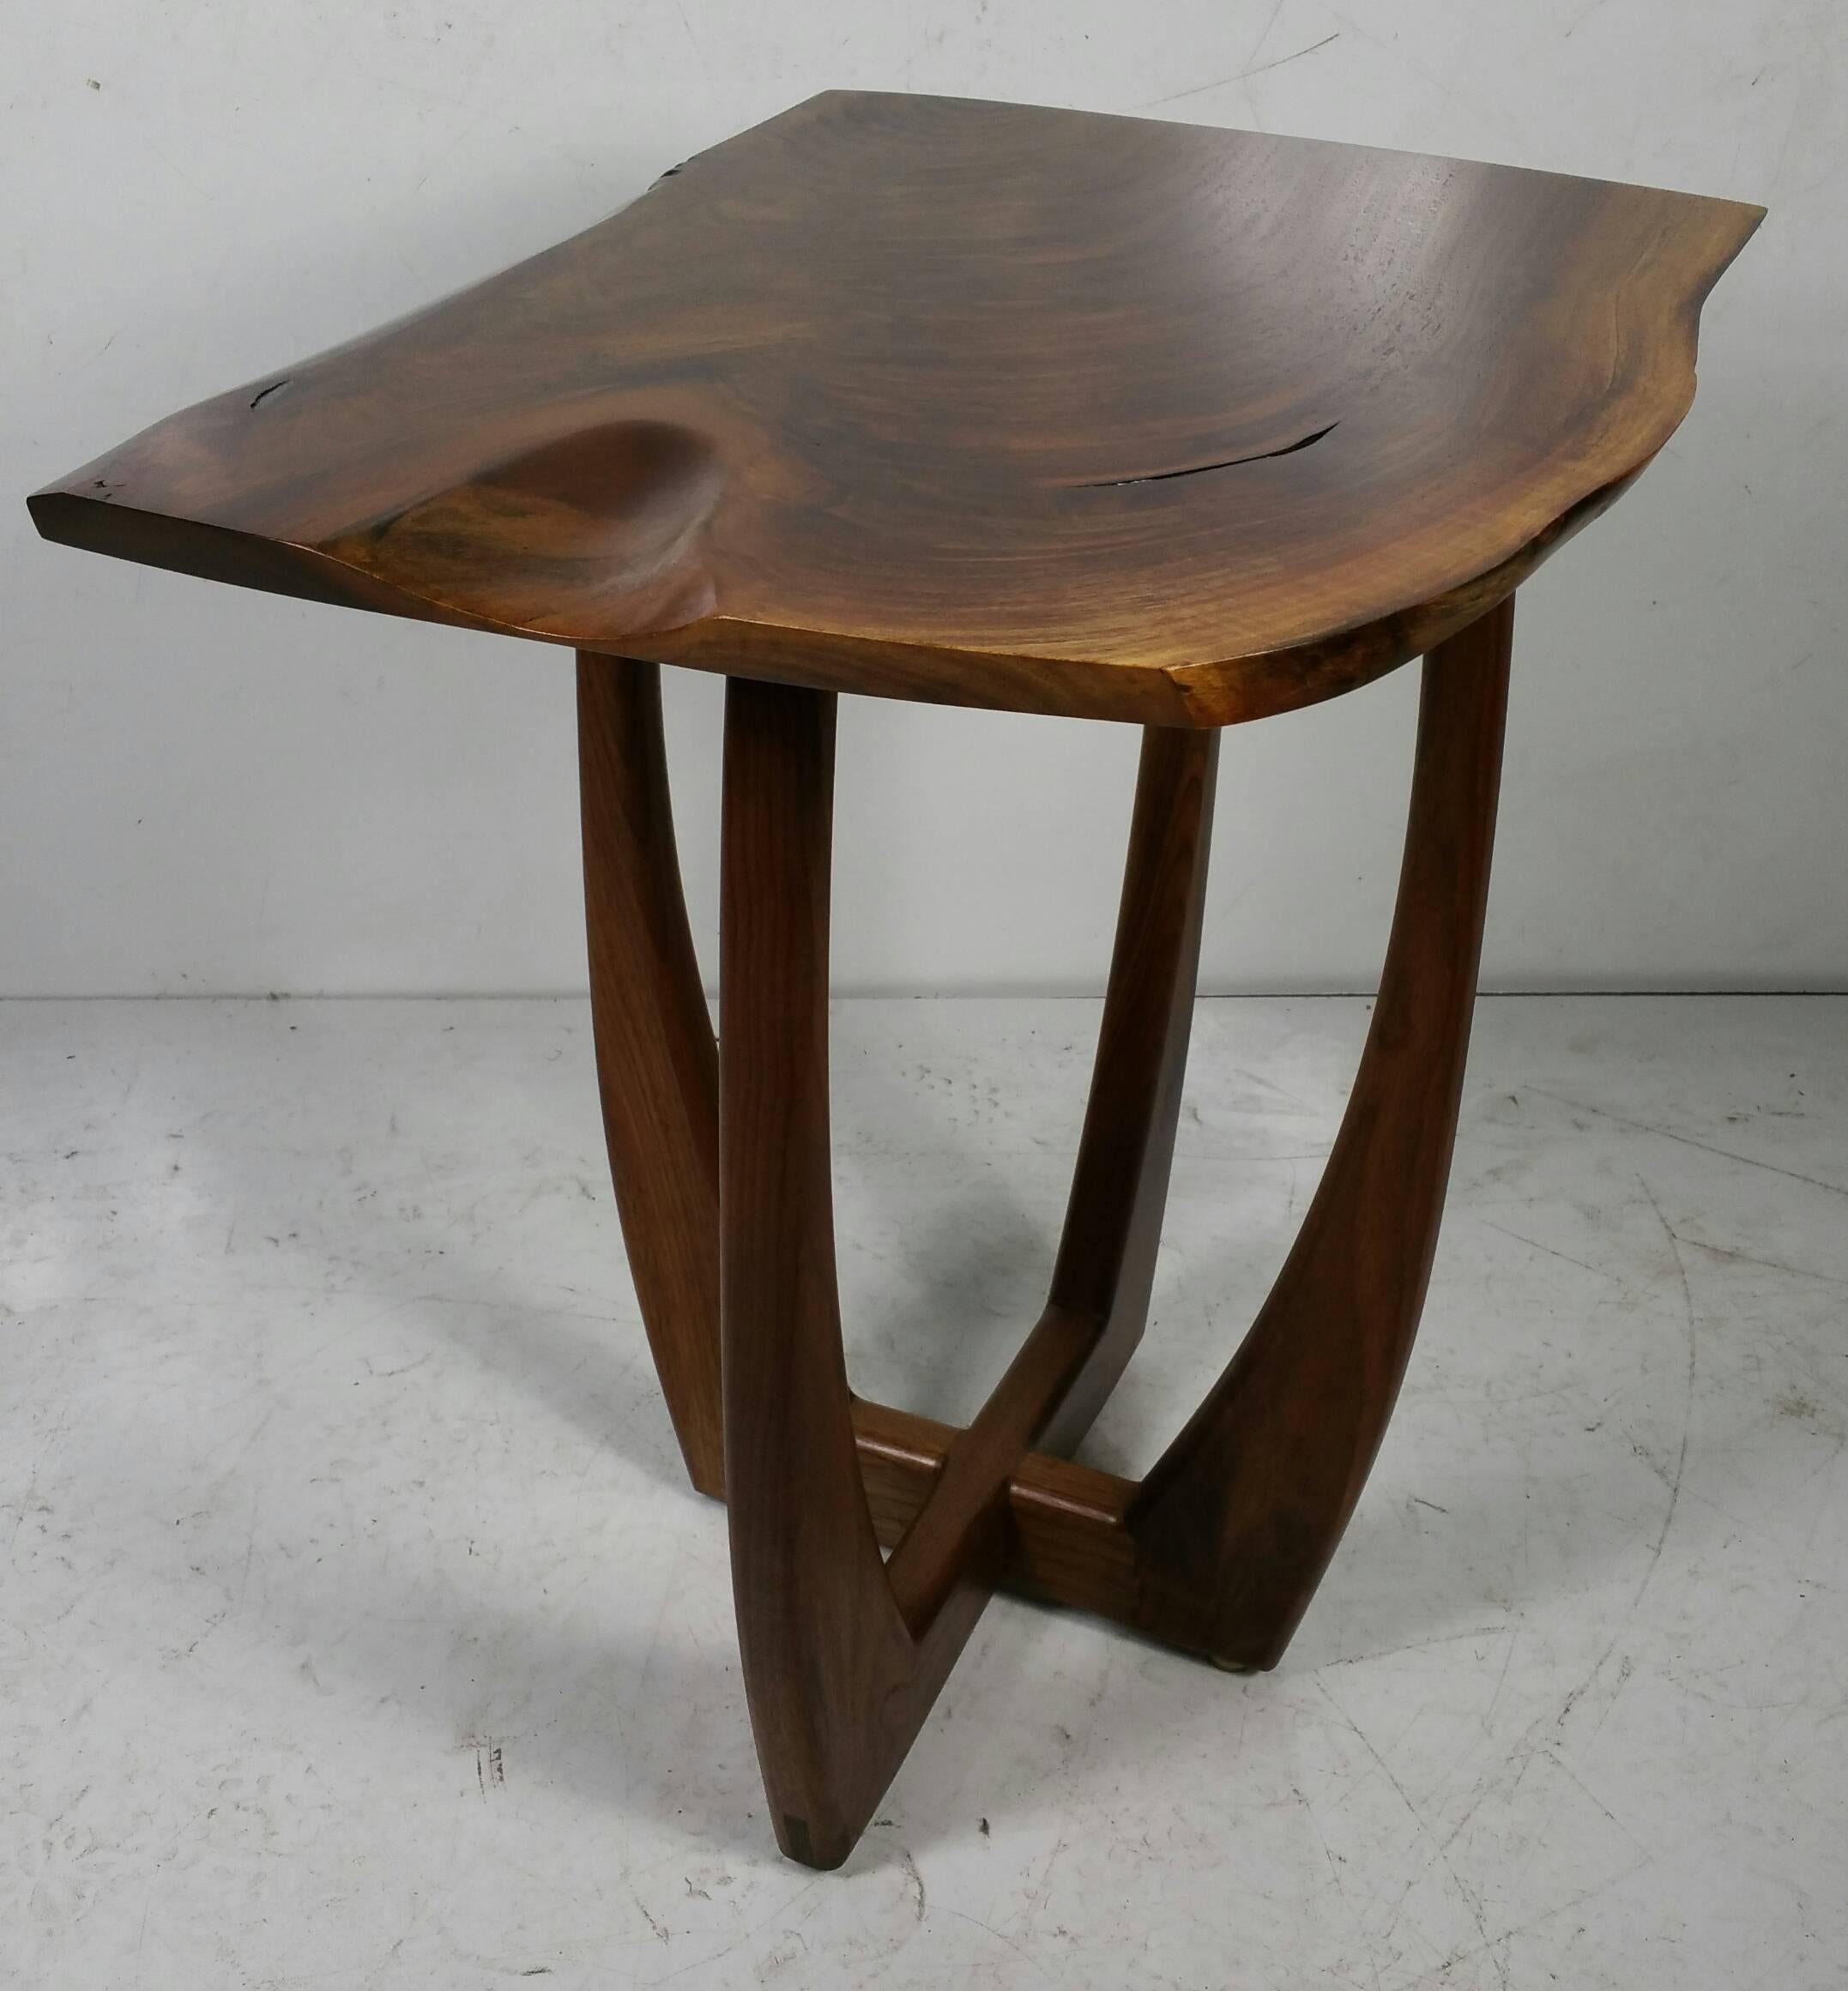 Figured walnut modernist table Griff Logan exhibits :
2013 Arts Council For Wyoming County, Perry, NY, “Local Color”
2007–present Ashwood Artisans, East Aurora, NY

Education:
1987-88 Graphic Careers Design School, Rochester, NY, Illustration,